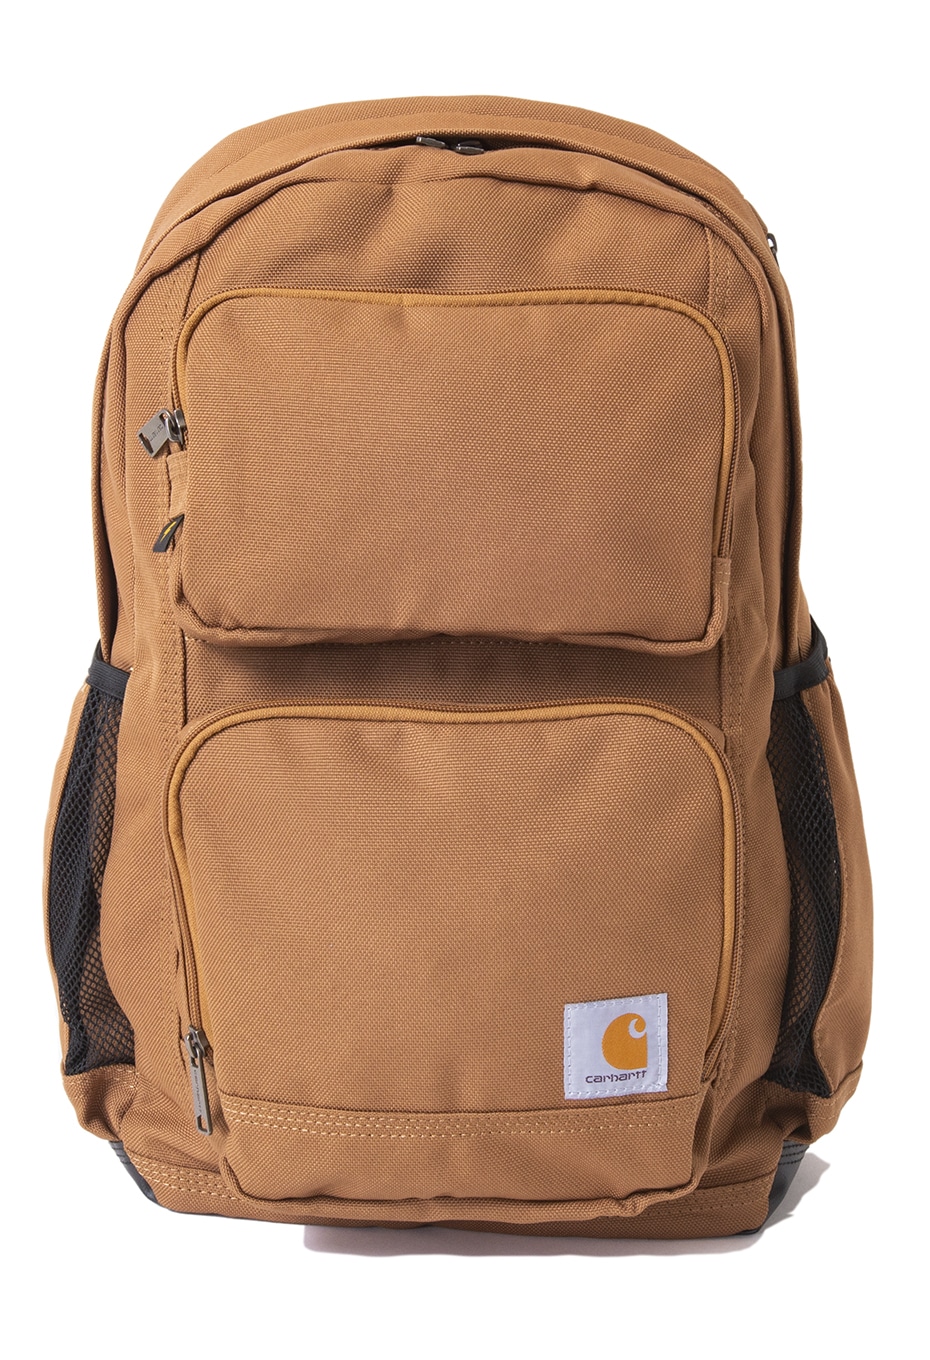 CARHARTT #B0000278 28L Dual-Compartment Backpack(ONE LT BROWN): バッグ